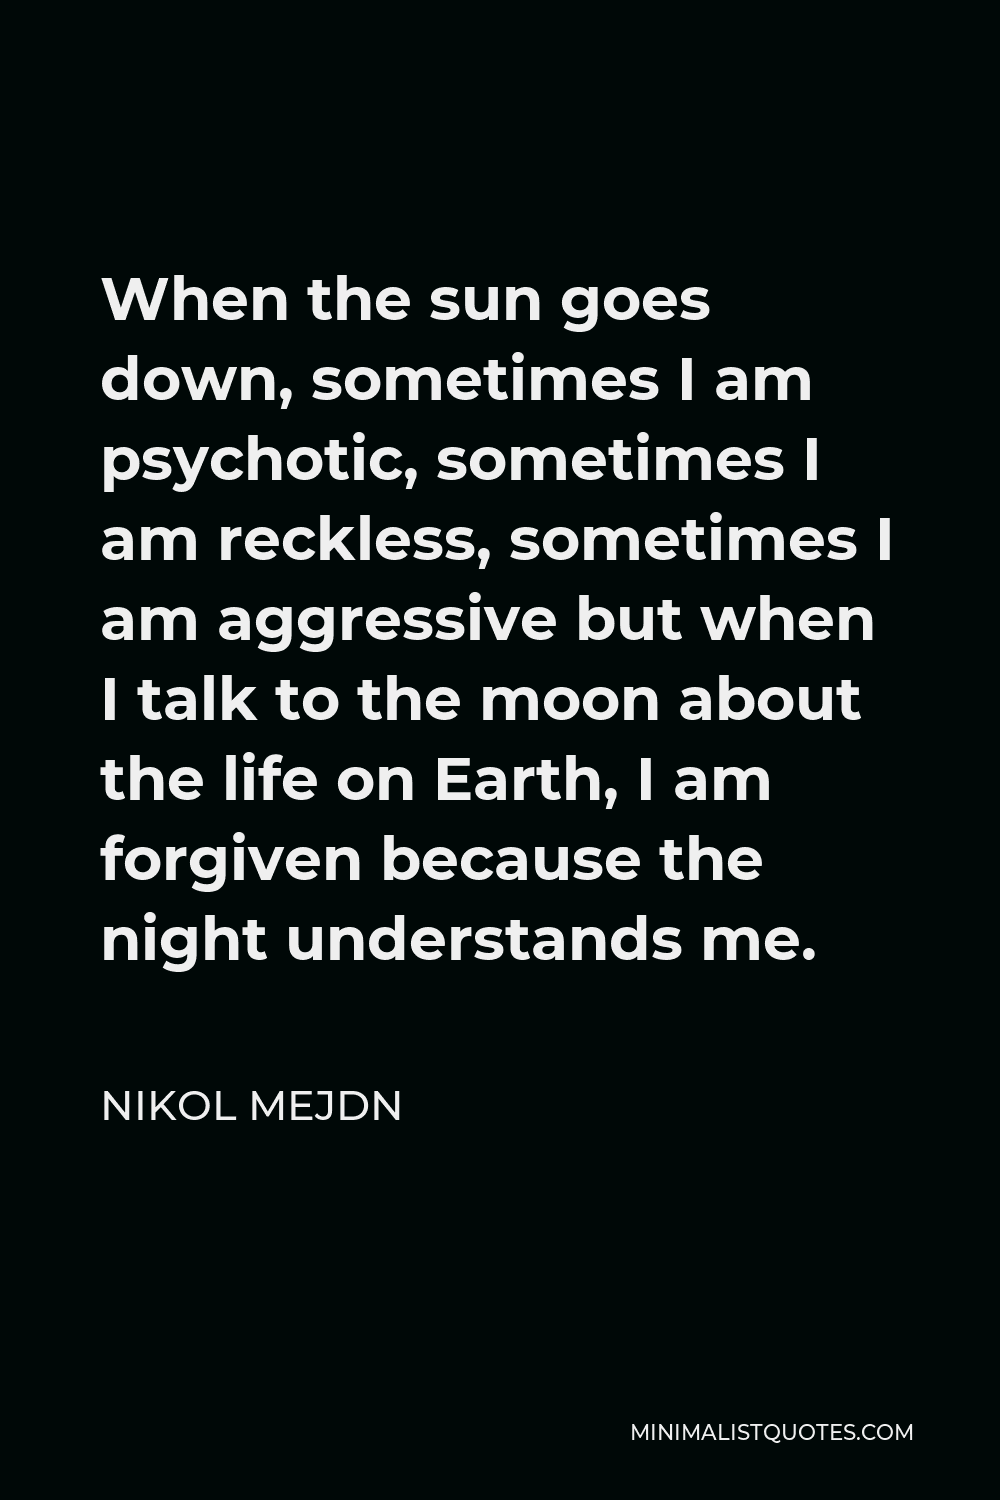 Nikol Mejdn Quote - When the sun goes down, sometimes I am psychotic, sometimes I am reckless, sometimes I am aggressive but when I talk to the moon about the life on Earth, I am forgiven because the night understands me.